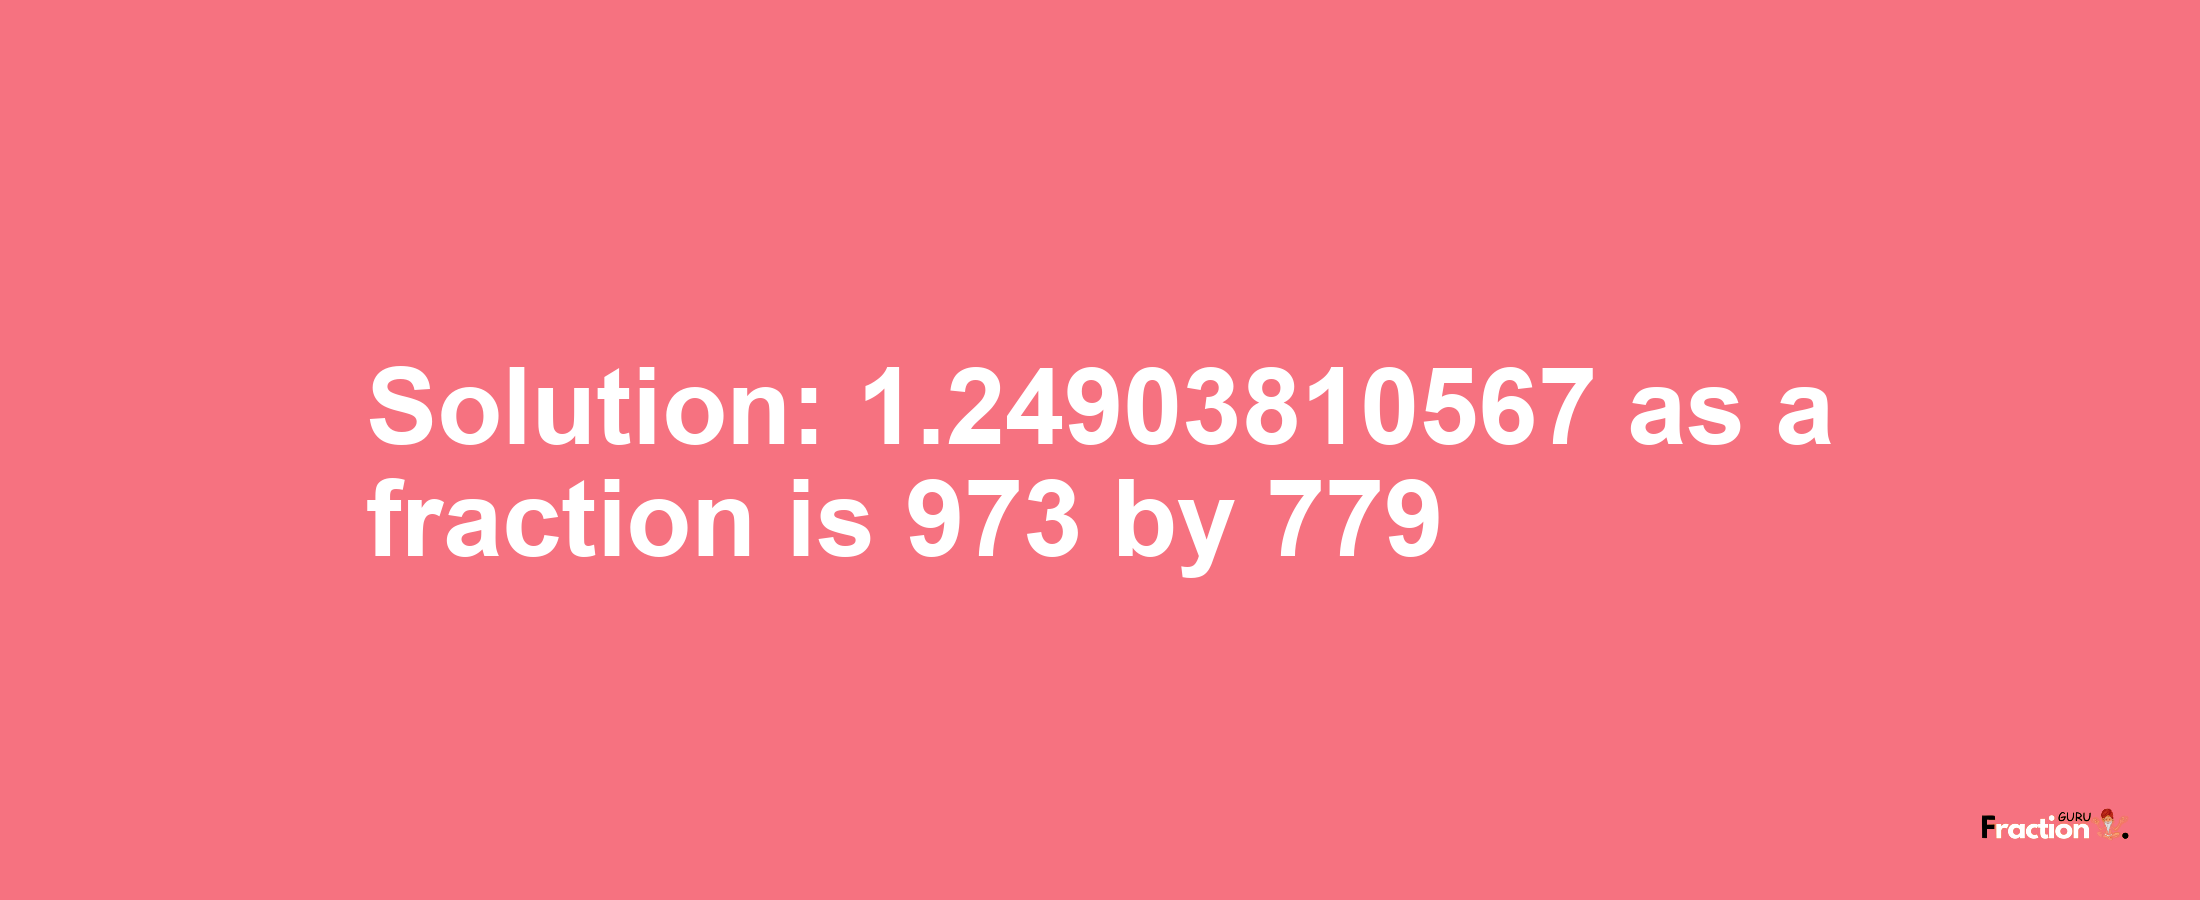 Solution:1.24903810567 as a fraction is 973/779